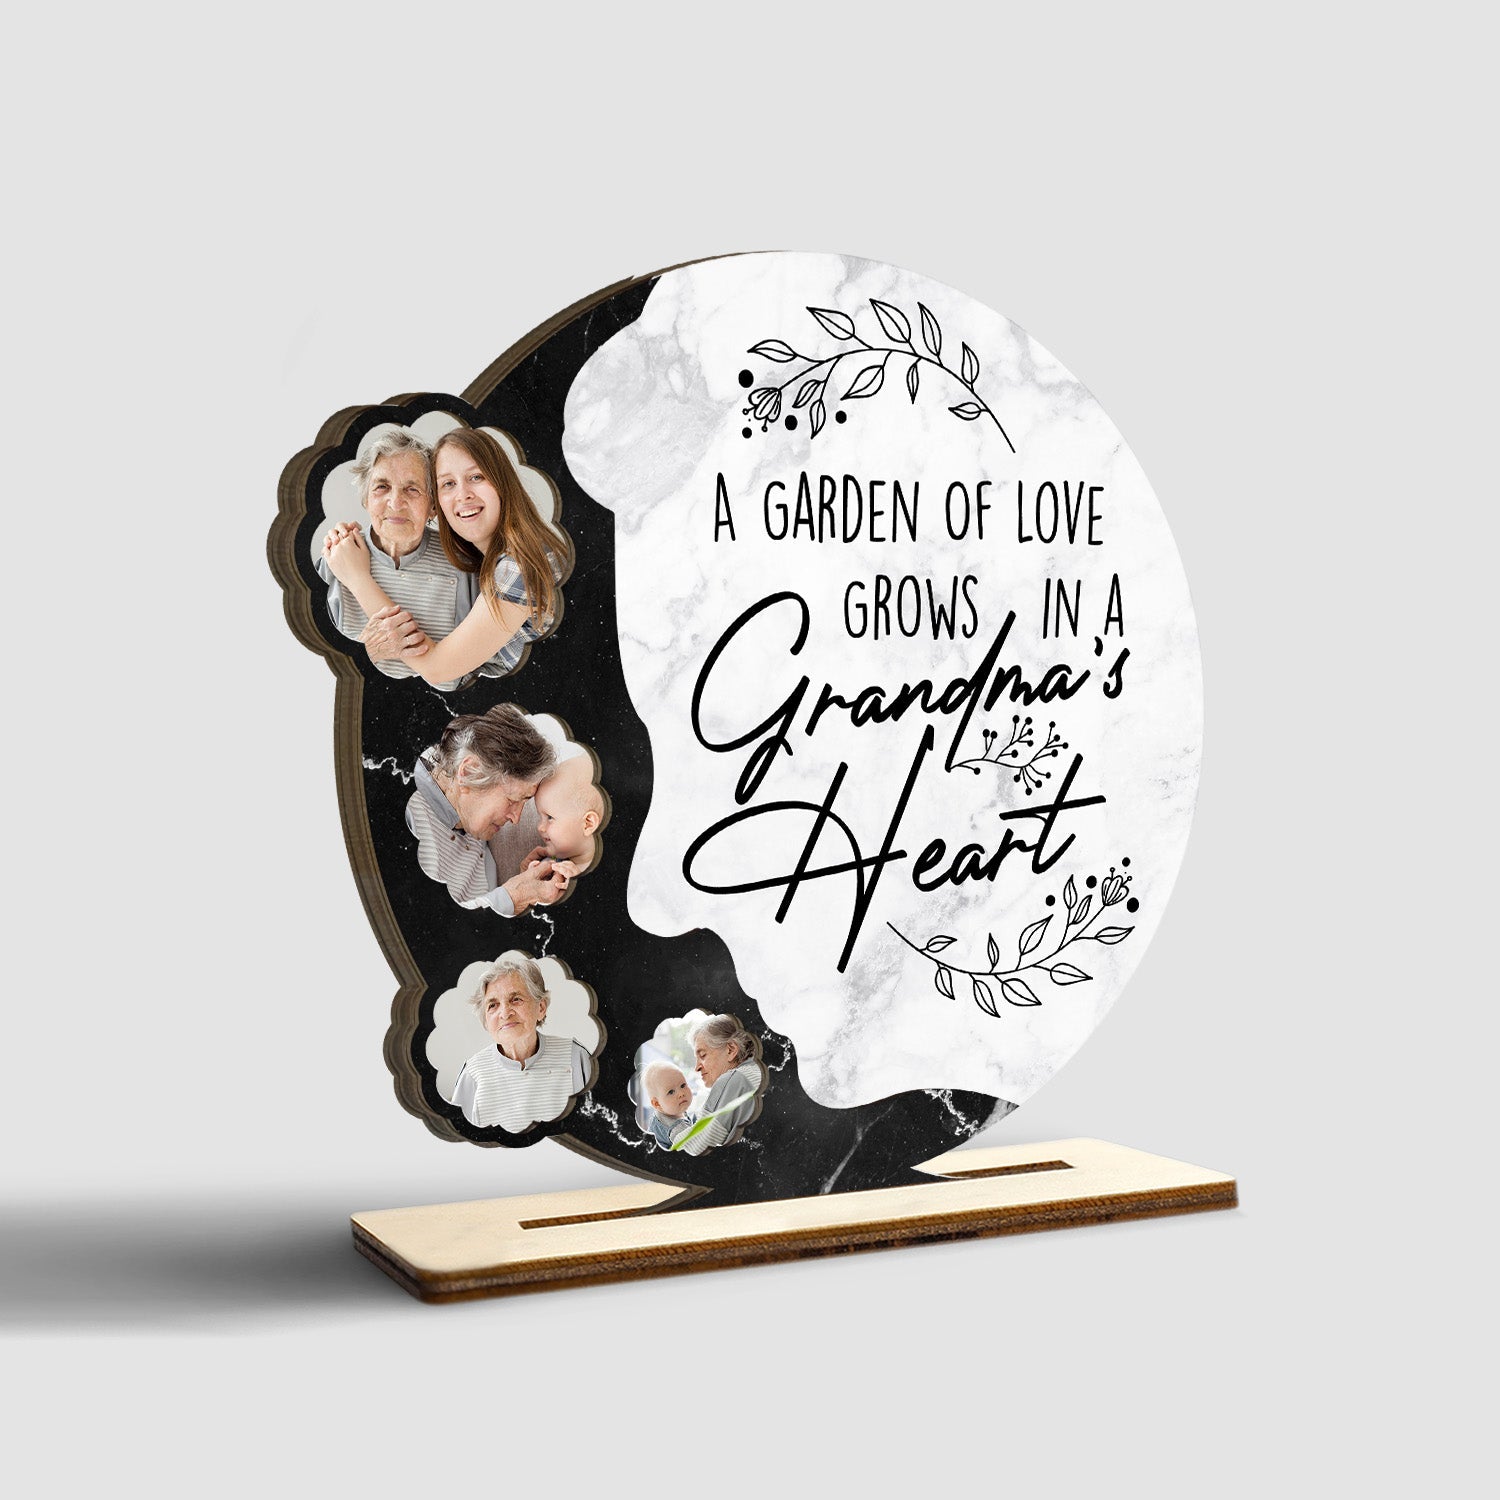 A Garden Of Love Grows In A Grandma's Heart, Custom Photo Collage, Wooden Plaque 3 Layers